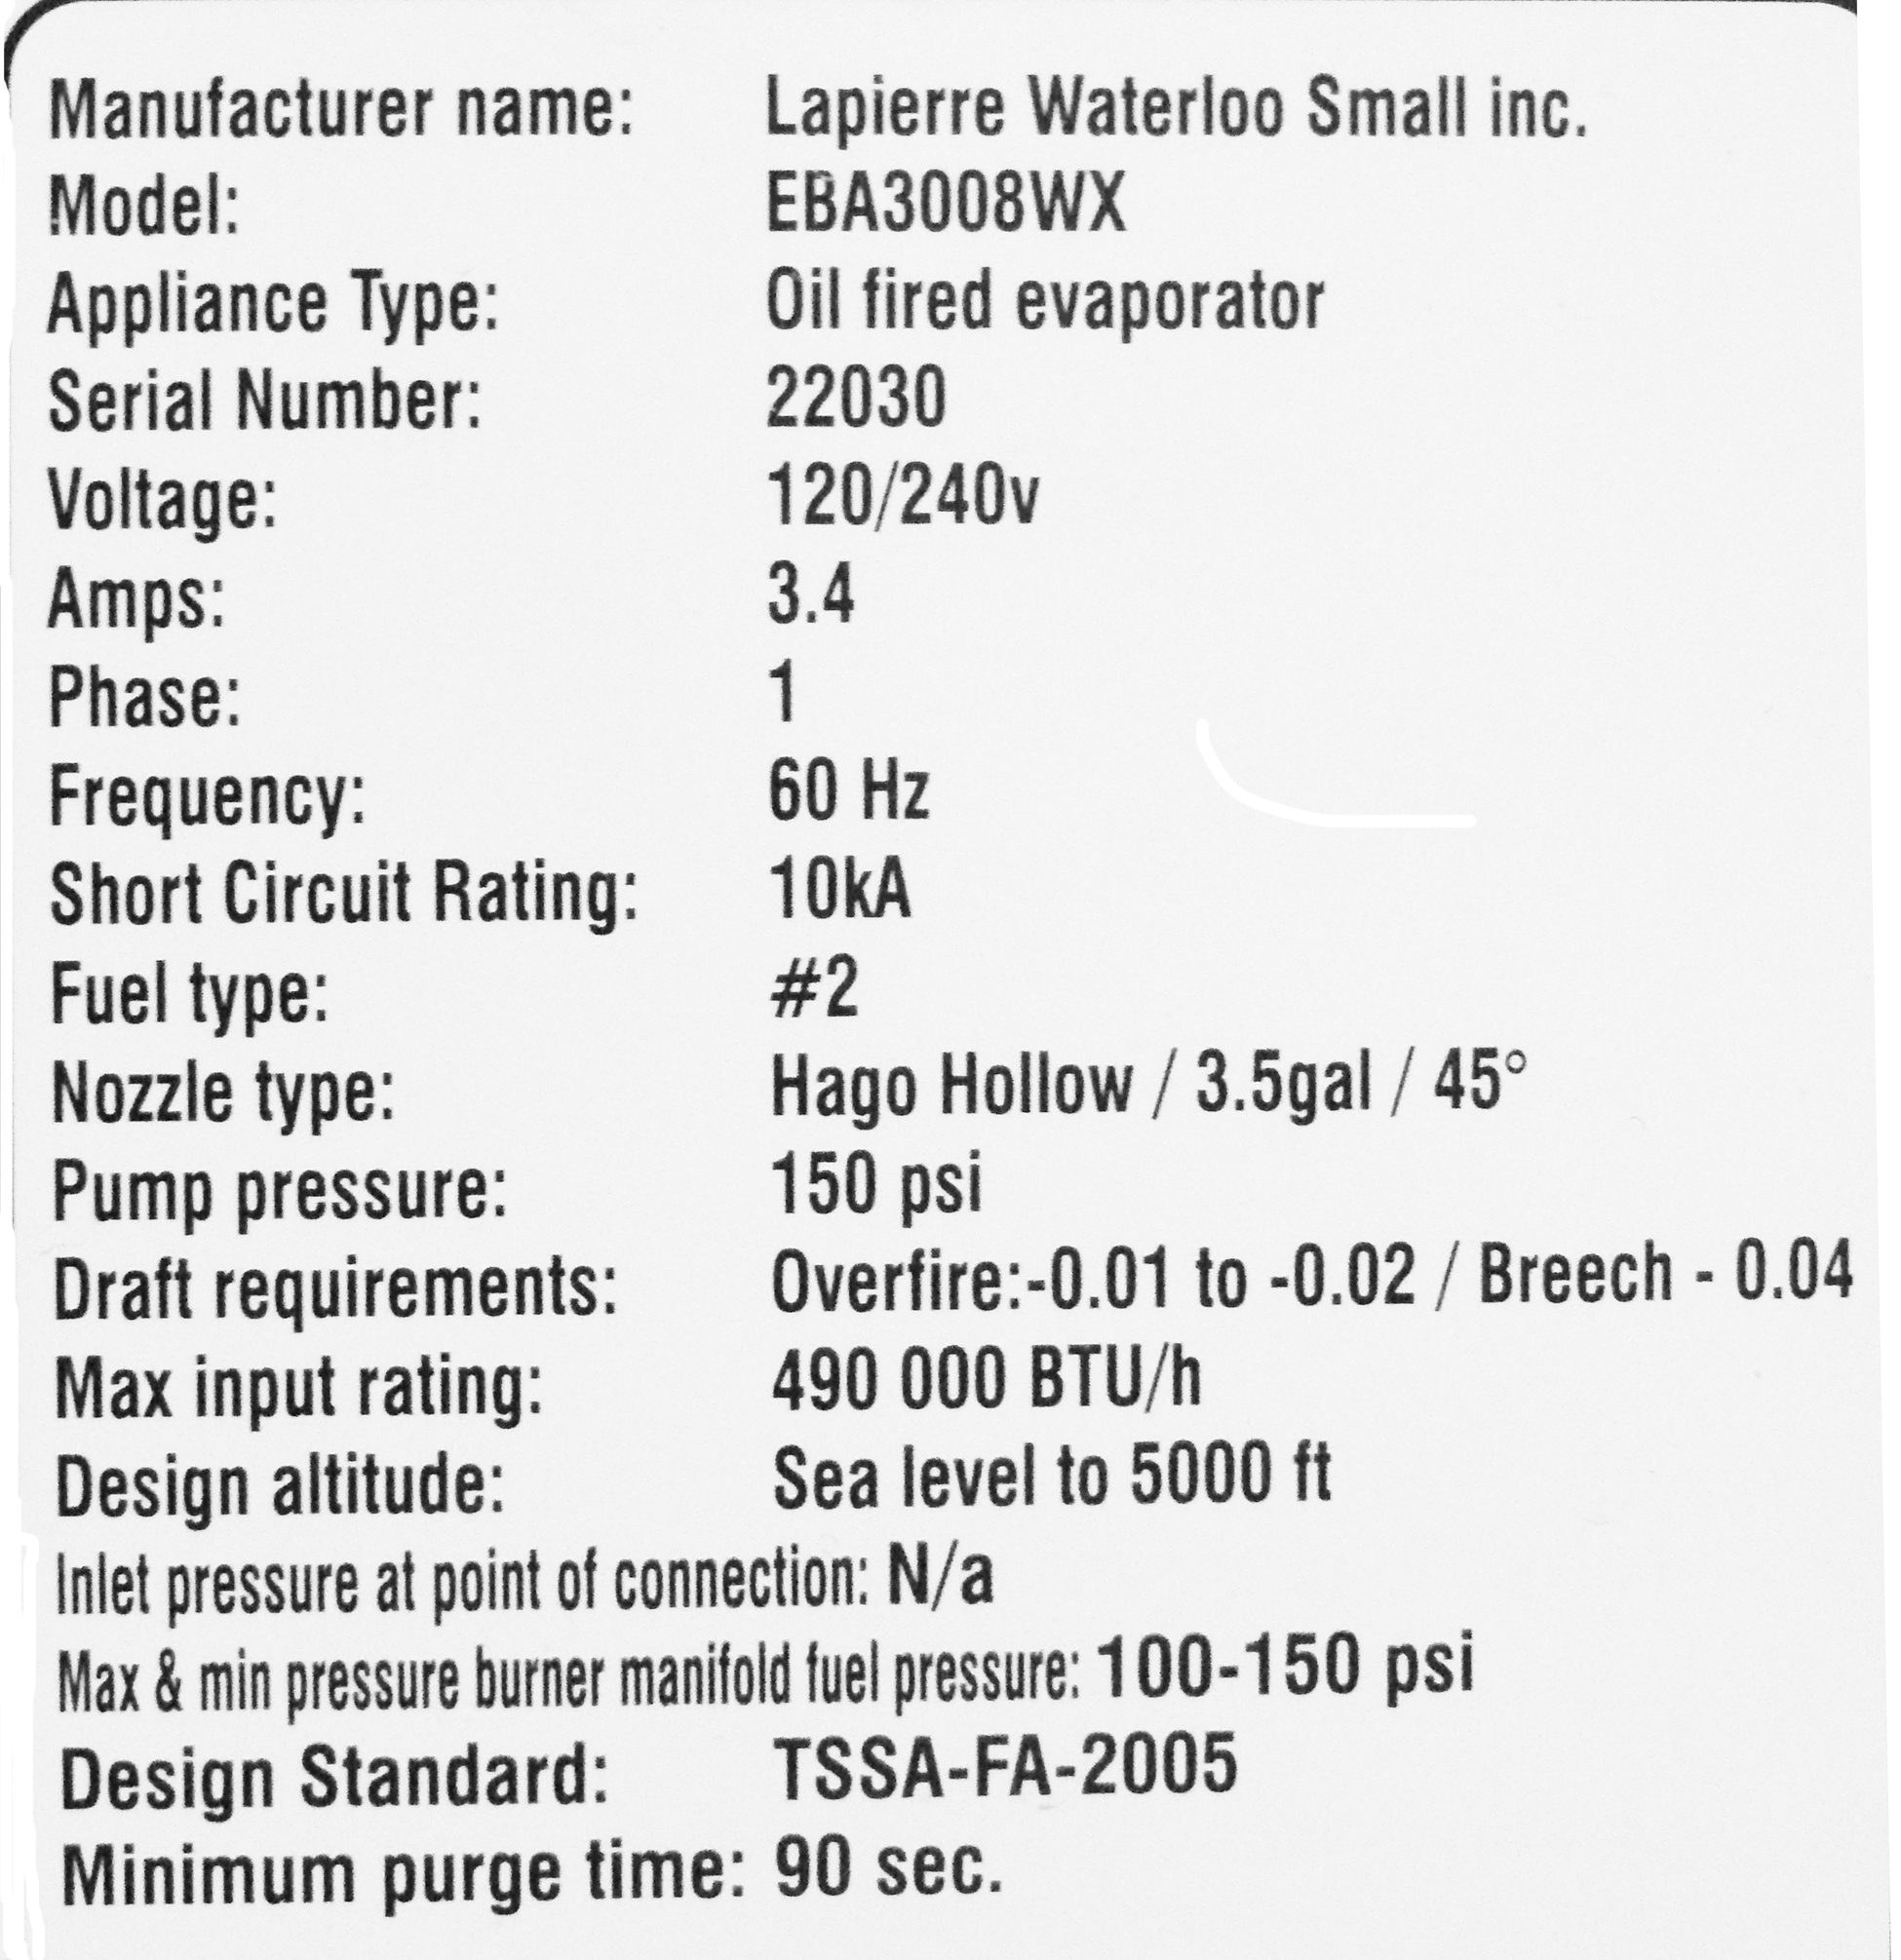 Example of appliance rating plates for oil-fired maple syrup evaporators